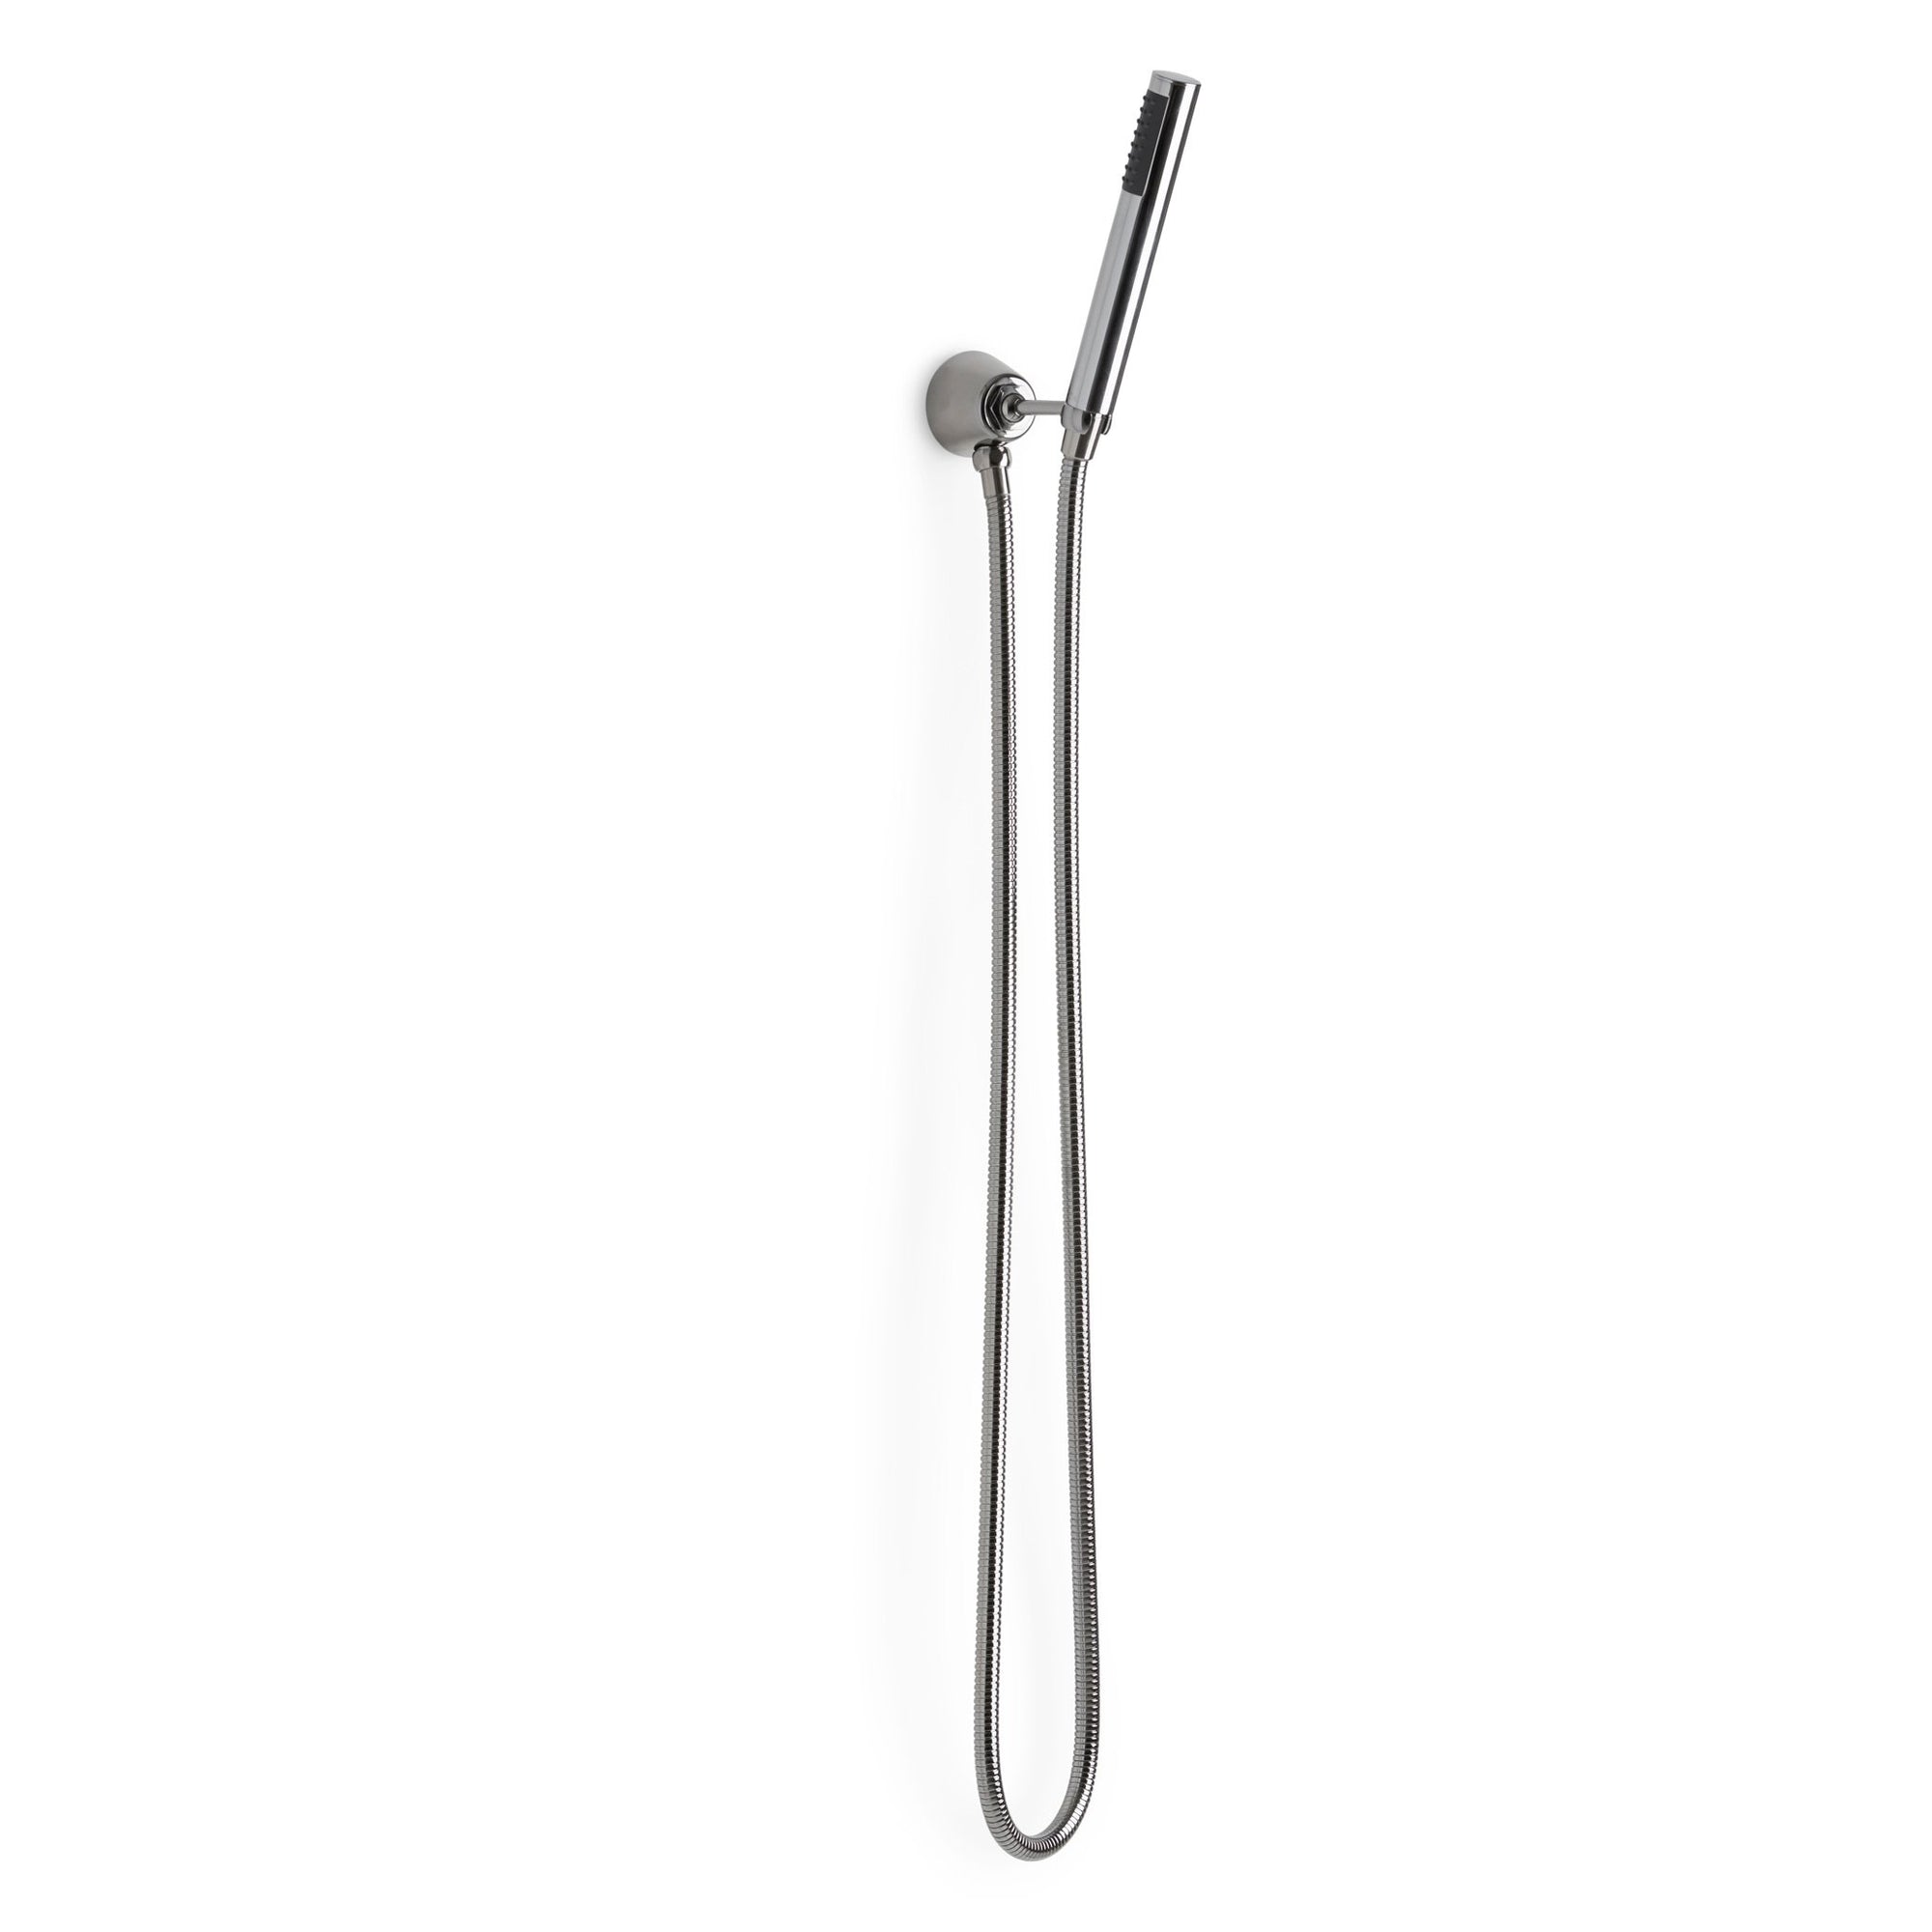 101WLMT-CP Sherle Wagner International Cylindrical Hand Shower Wall Mount in Polished Chrome metal finish